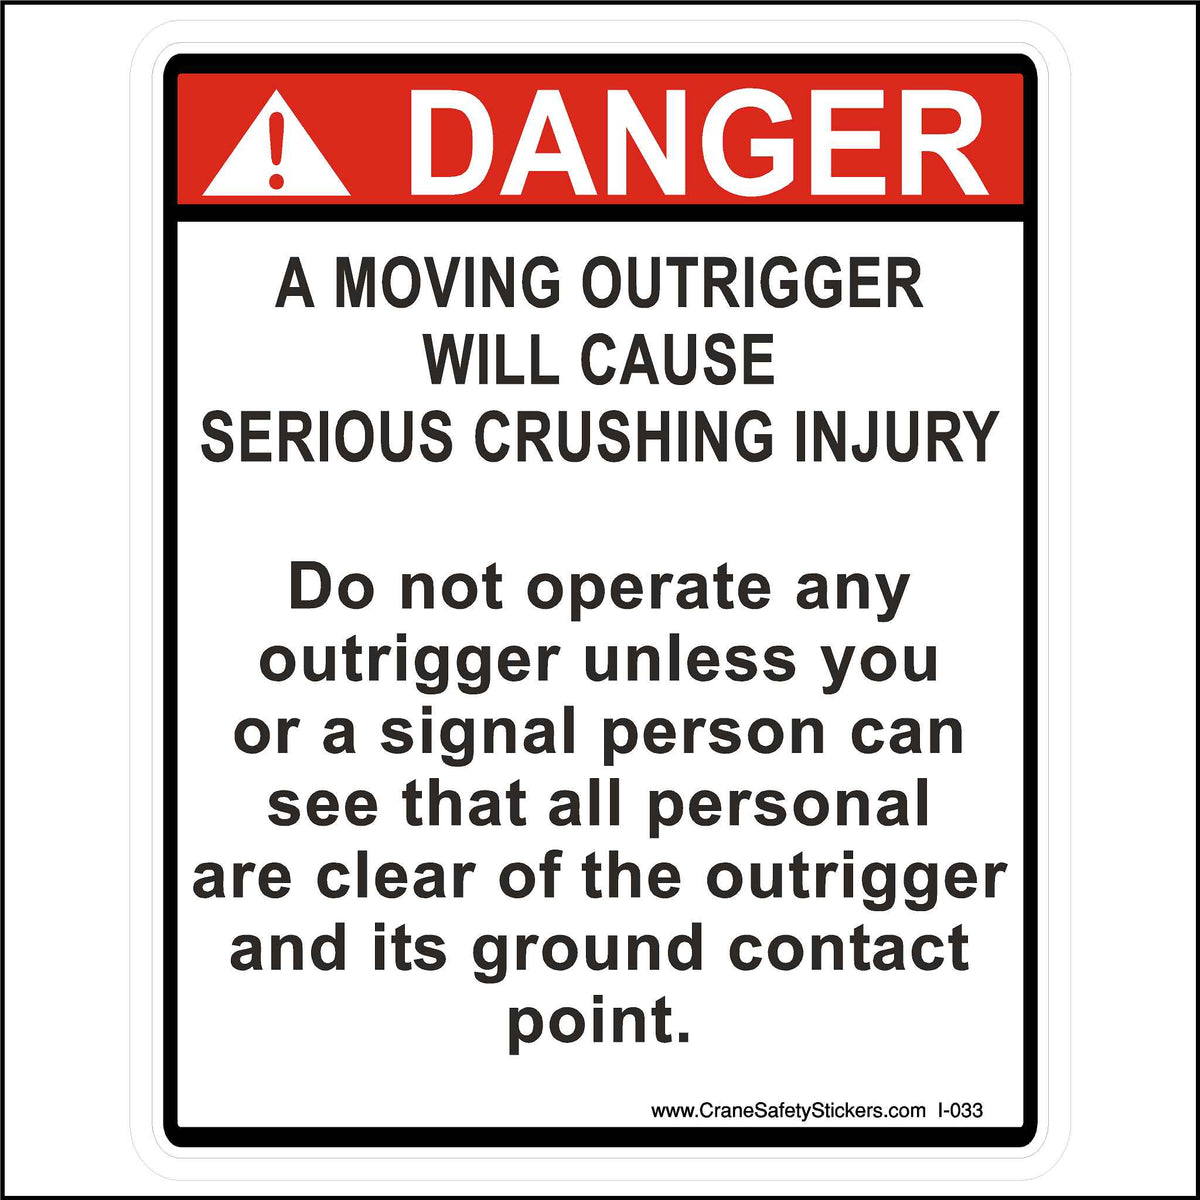 Moving Outrigger Sticker Printed With. A Moving Outrigger Will Cause Serious Crushing Injury. Do not operate any outrigger unless you or a signal person can see that all personnel are clear of the outrigger and its ground contact point.